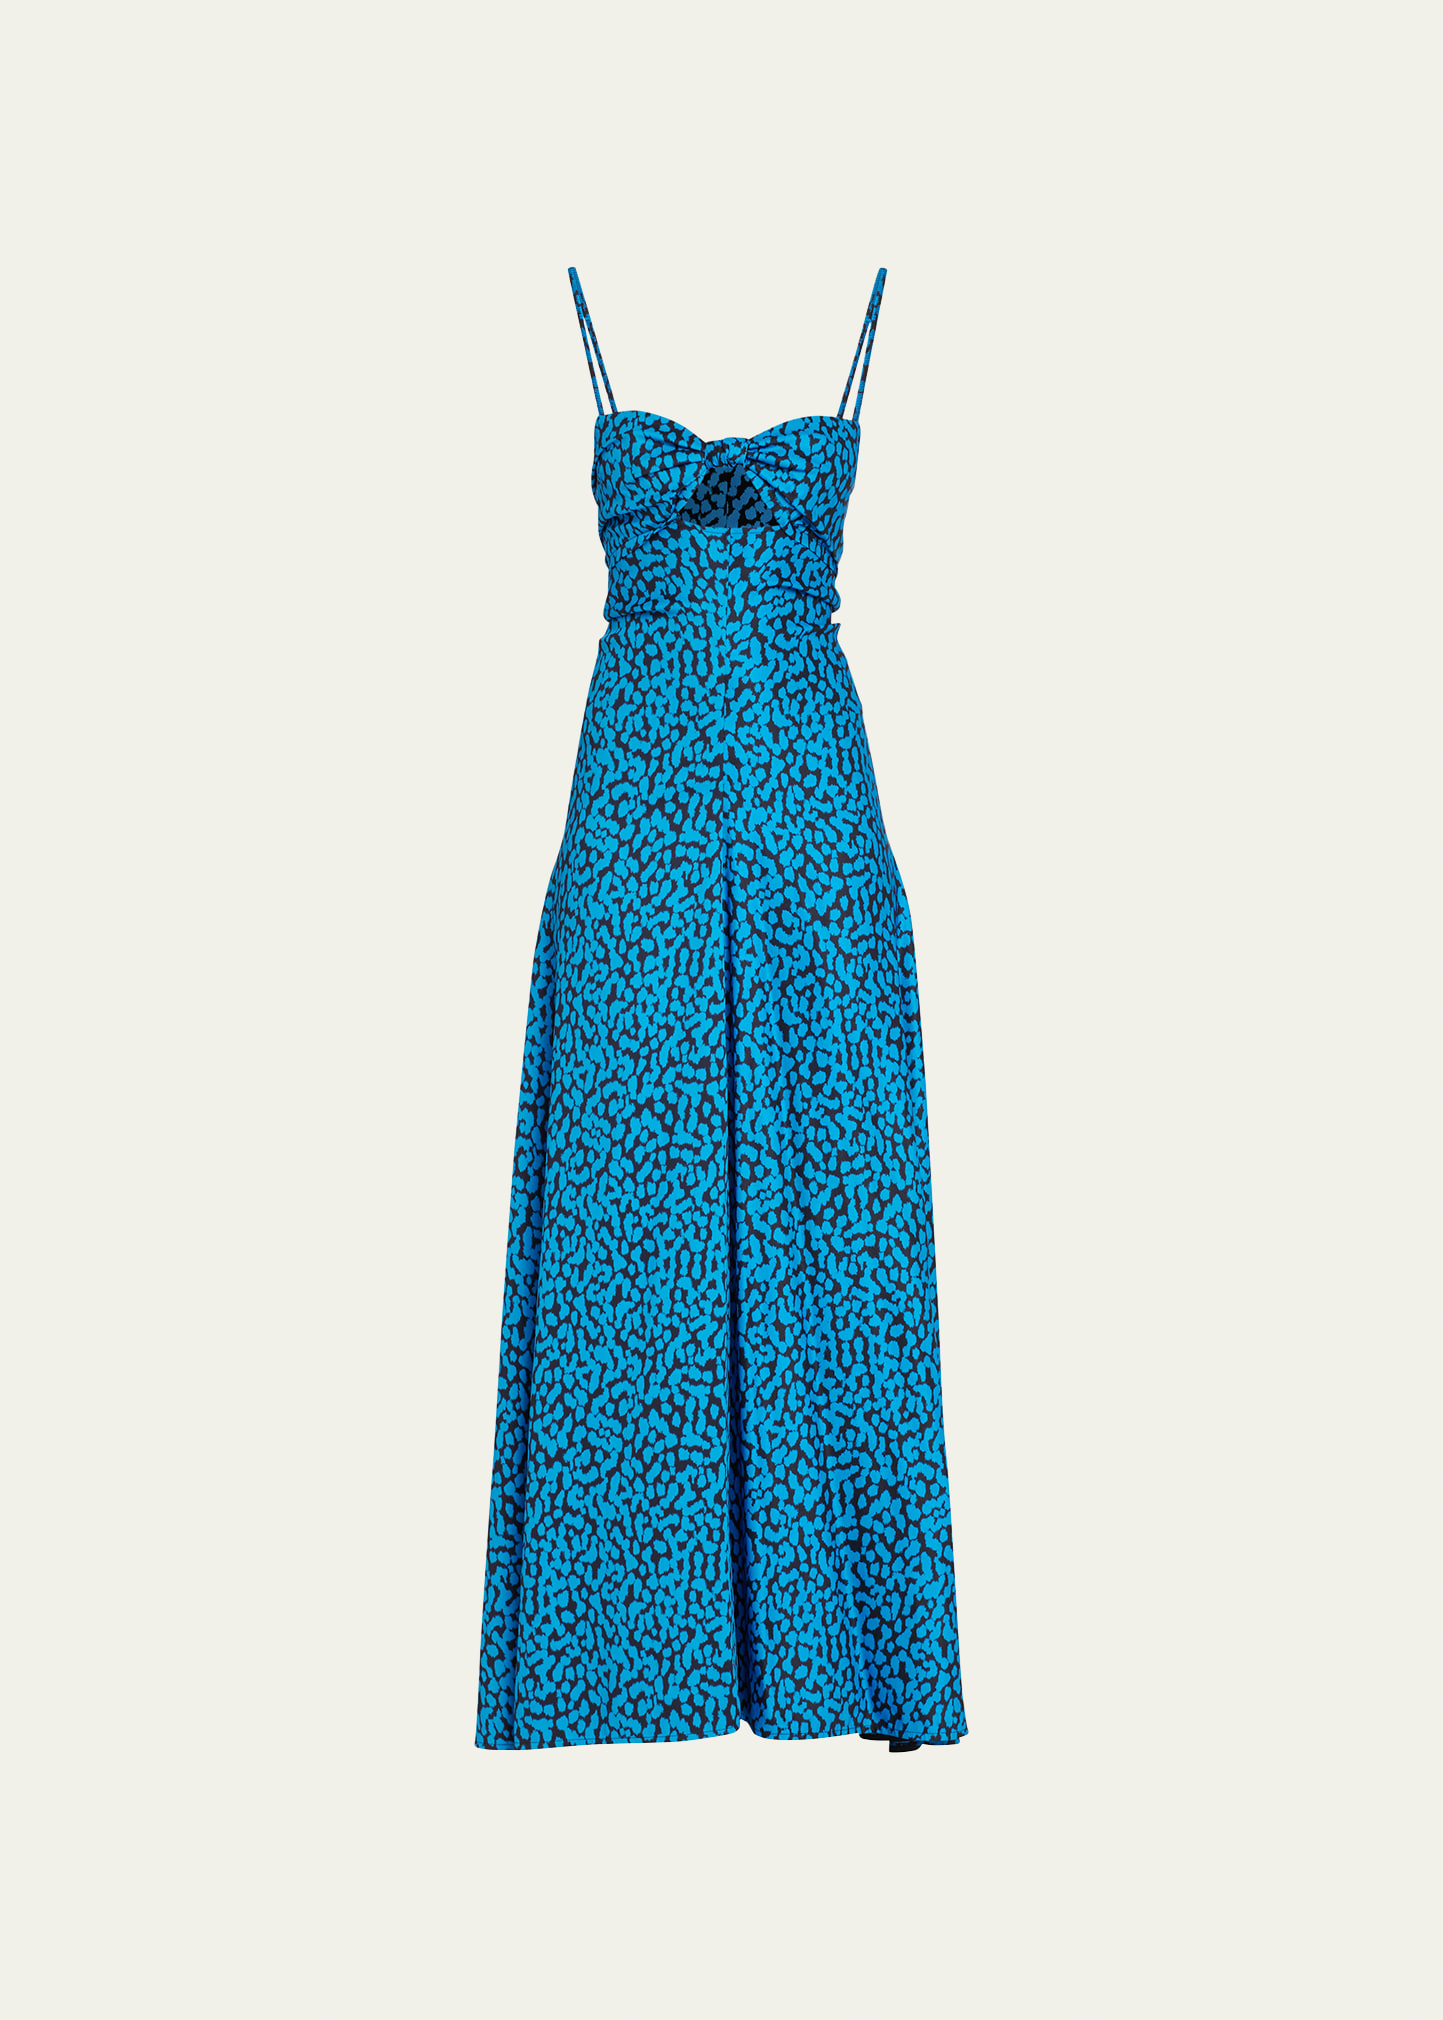 Proenza Schouler Printed Leopard Maxi Dress with Keyhole Front